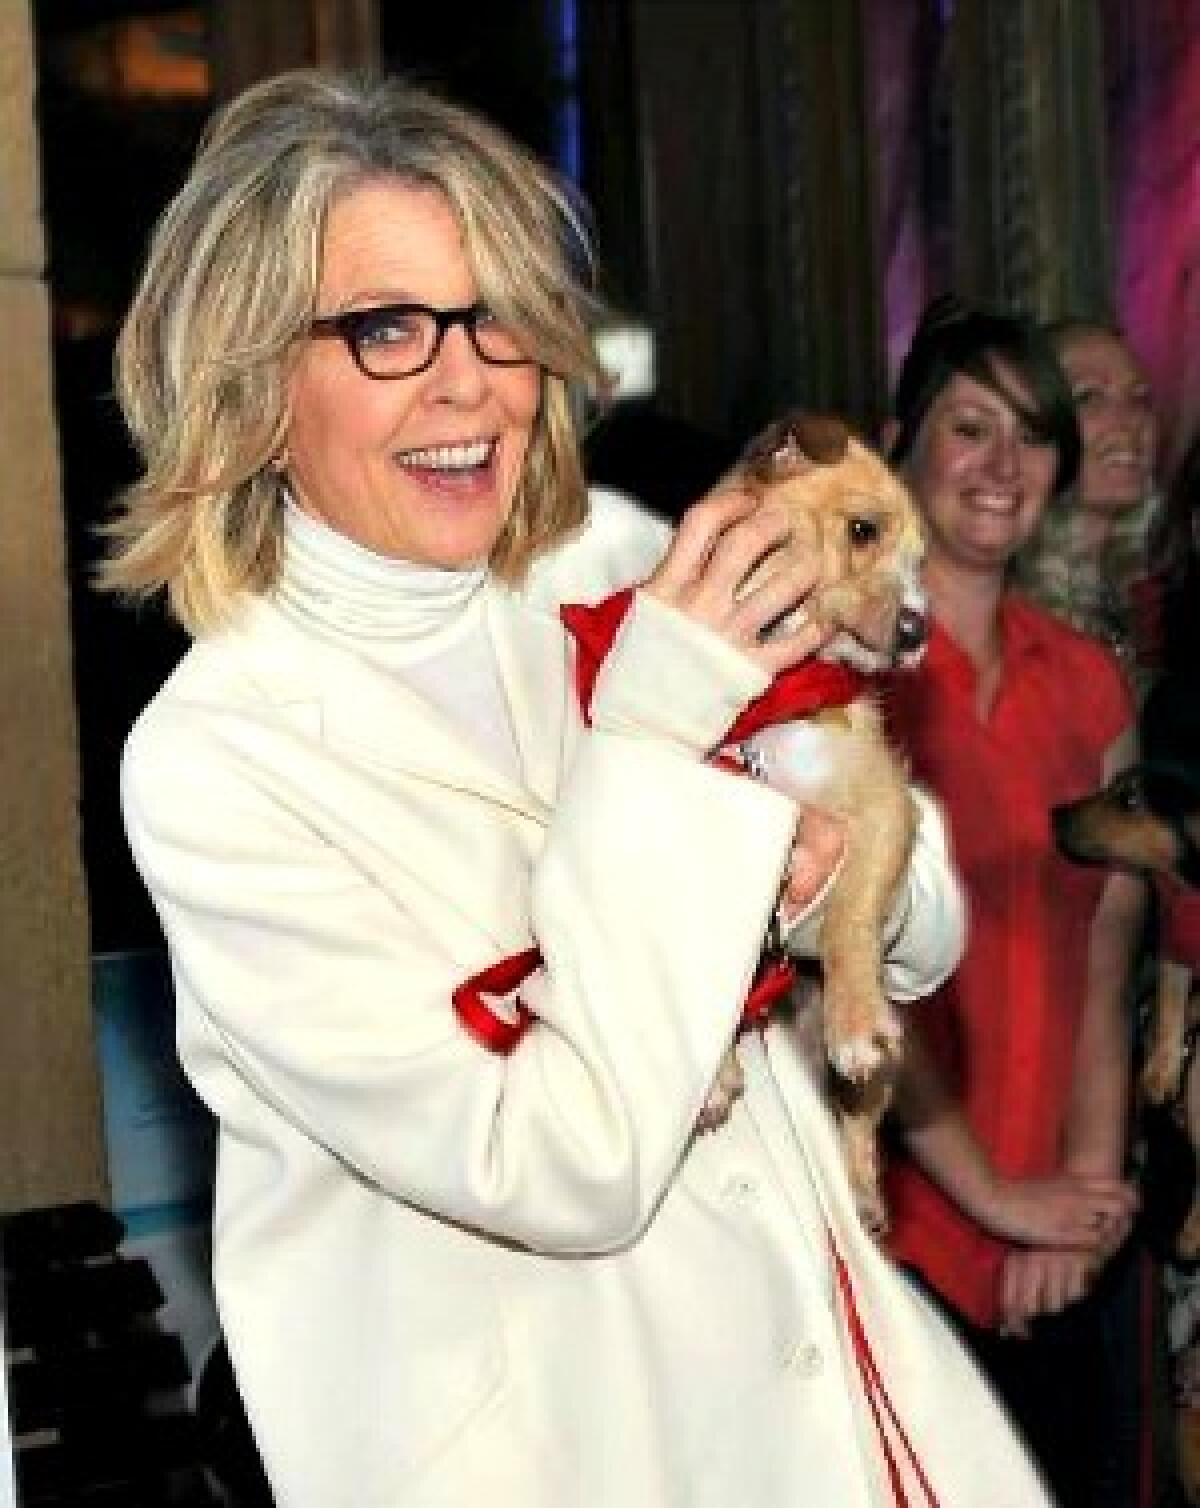 Actress Diane Keaton arrives at the premiere of "Darling Companion" at the Egyptian Theatre in Hollywood.